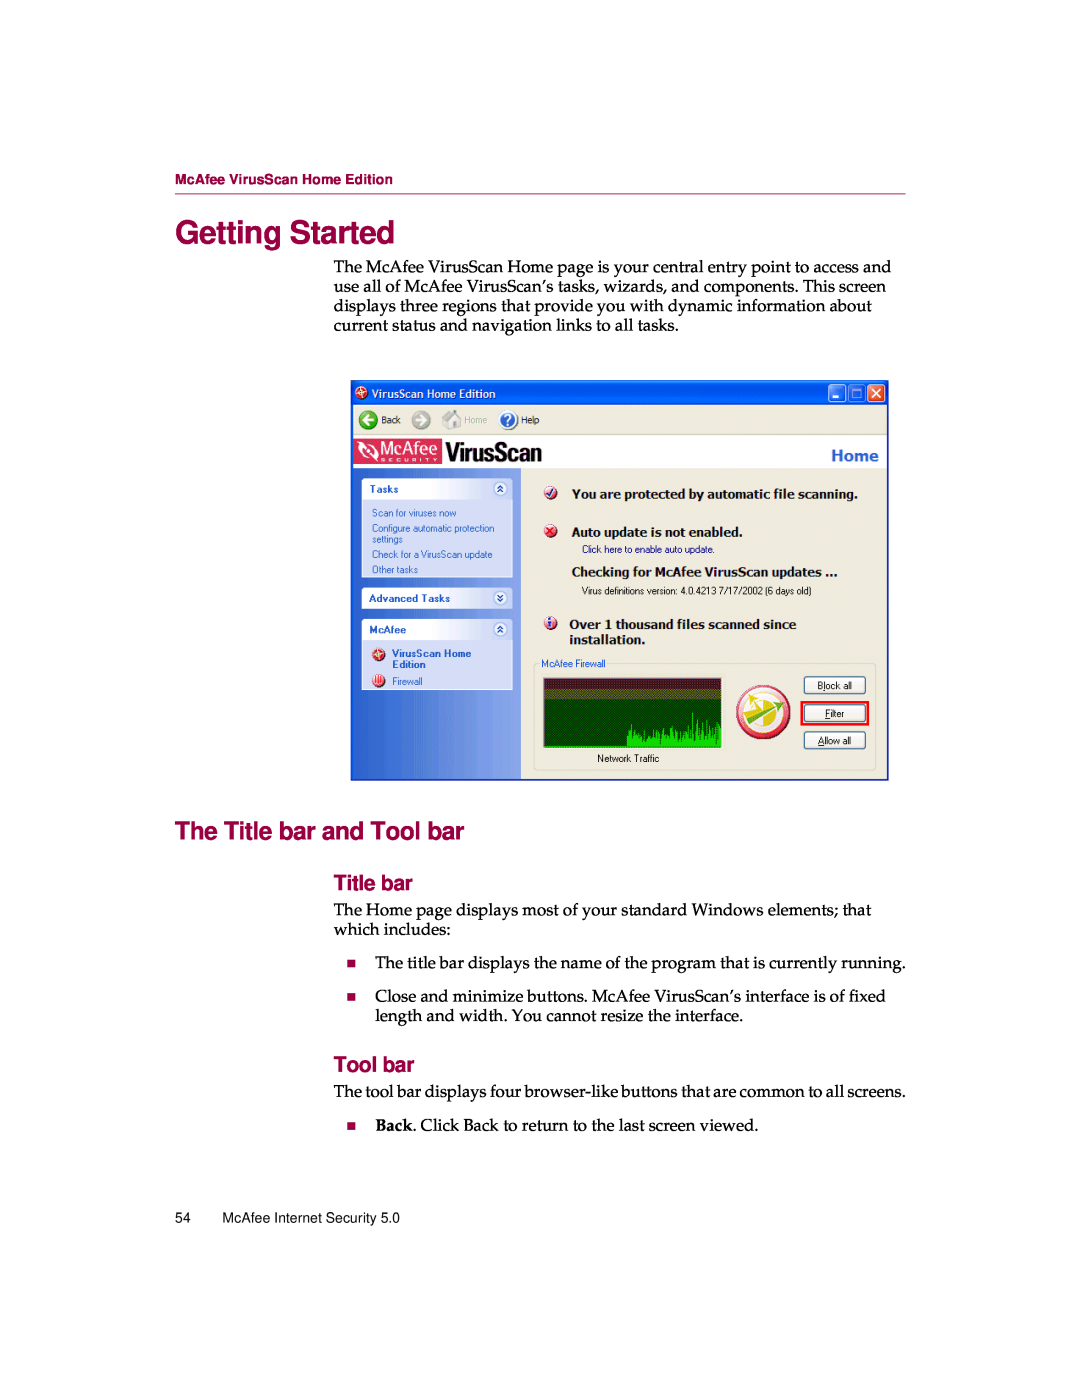 McAfee 5 manual Getting Started, Title bar, Tool bar, McAfee Internet Security 